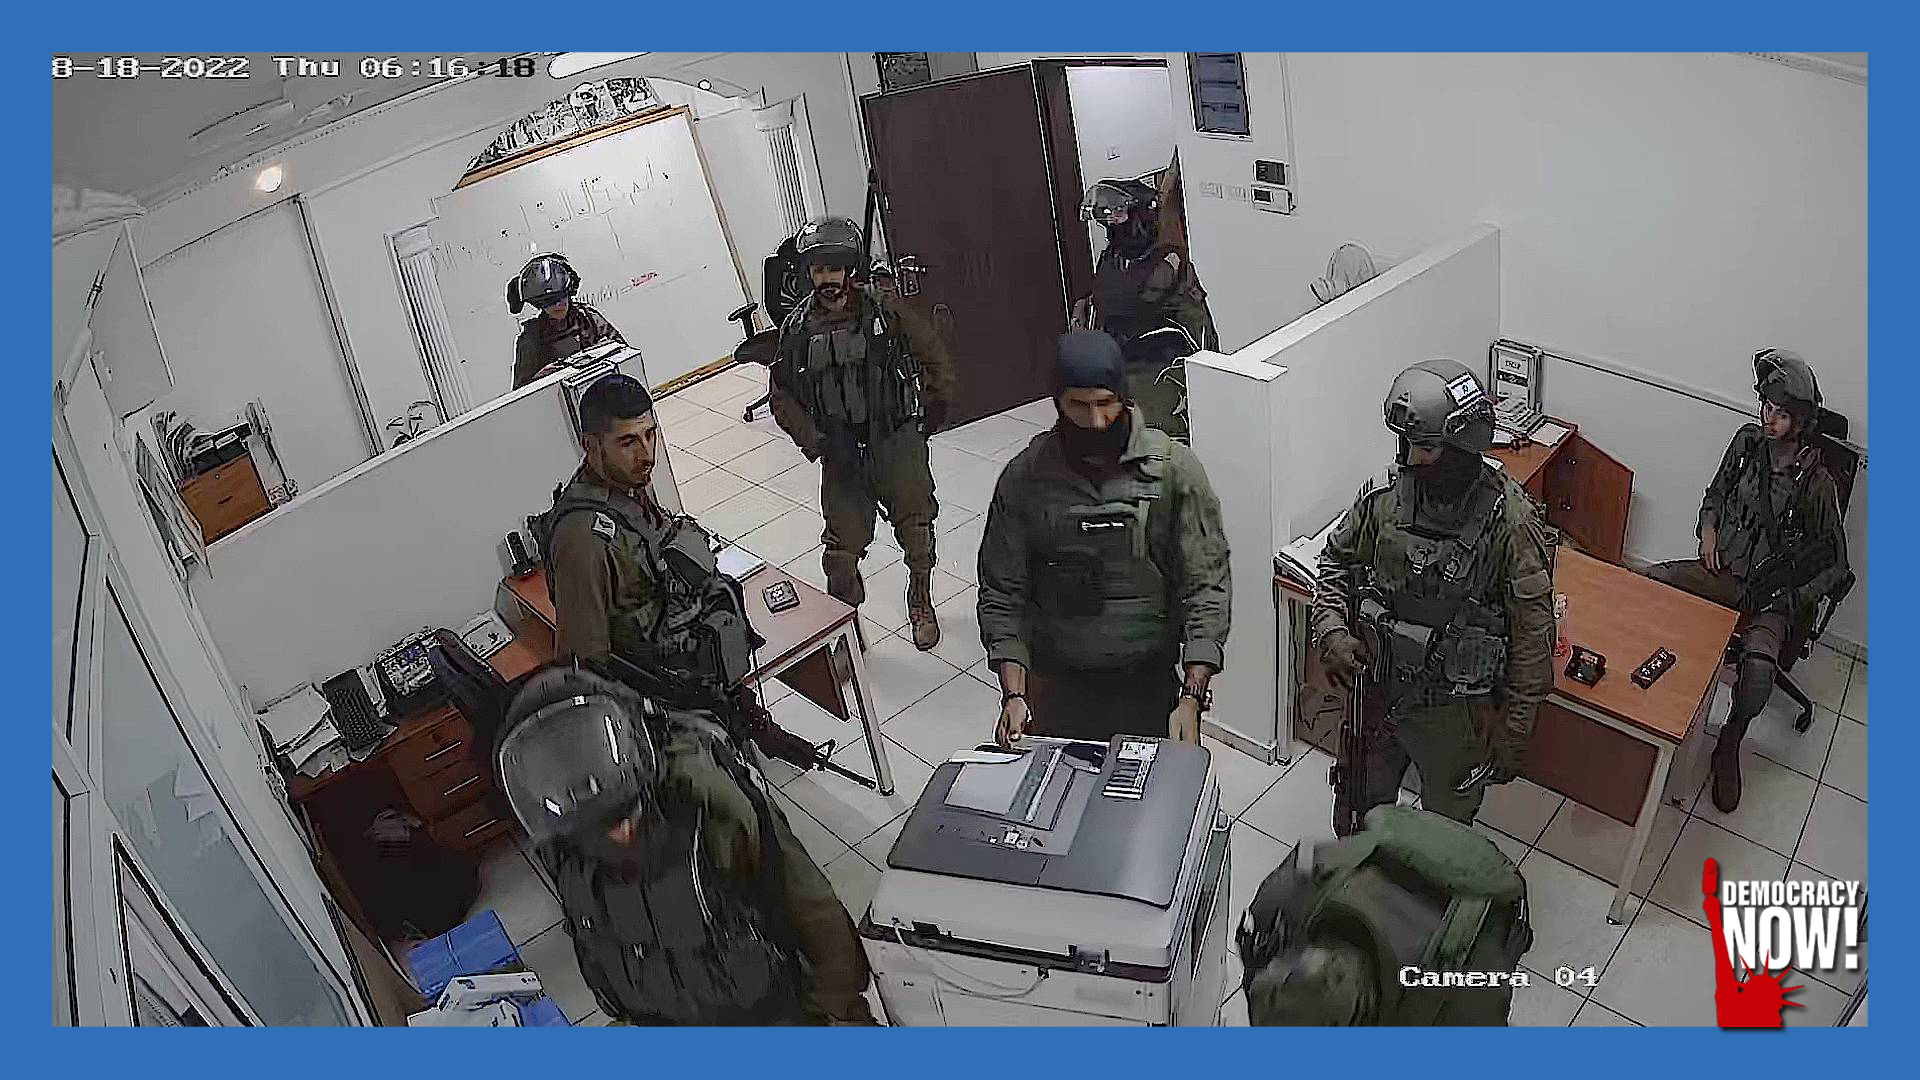 Palestinian NGOs Speak Out After Israeli Forces Raid Offices & Declare Them to Be “Terrorist” Groups